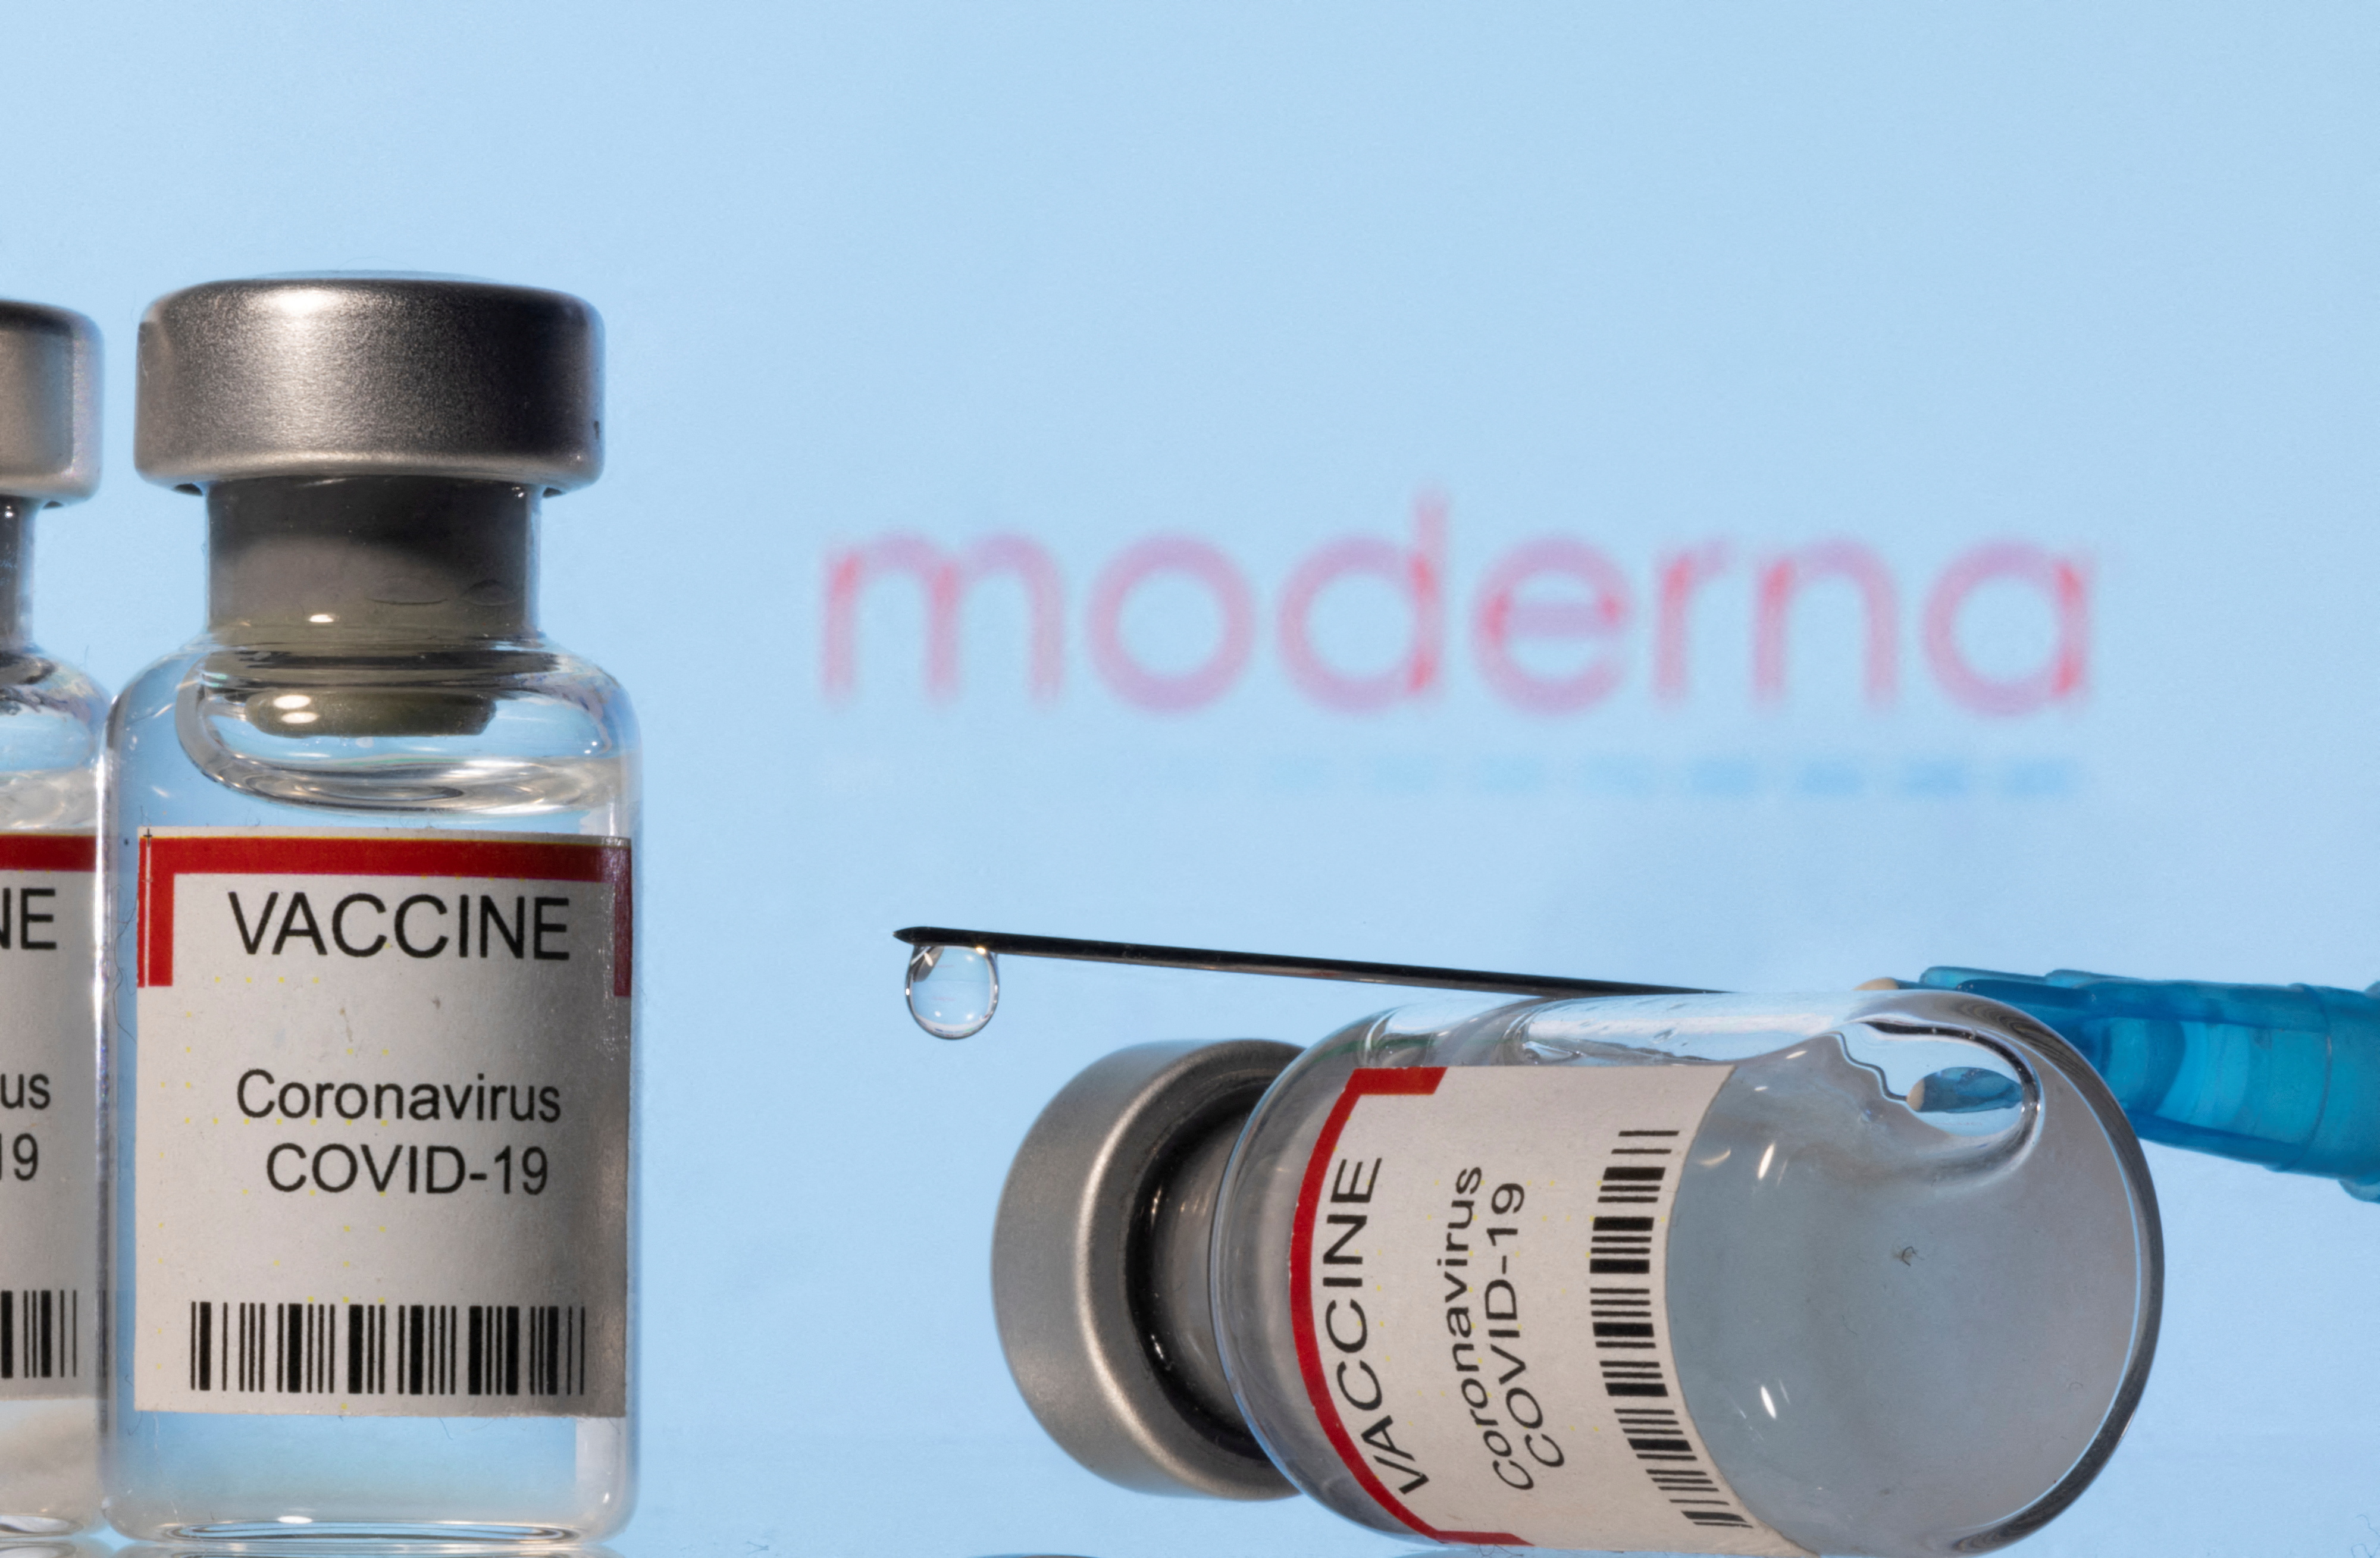 Illustration shows vials labelled "VACCINE Coronavirus COVID-19" and a syringe in front of a displayed Moderna logo